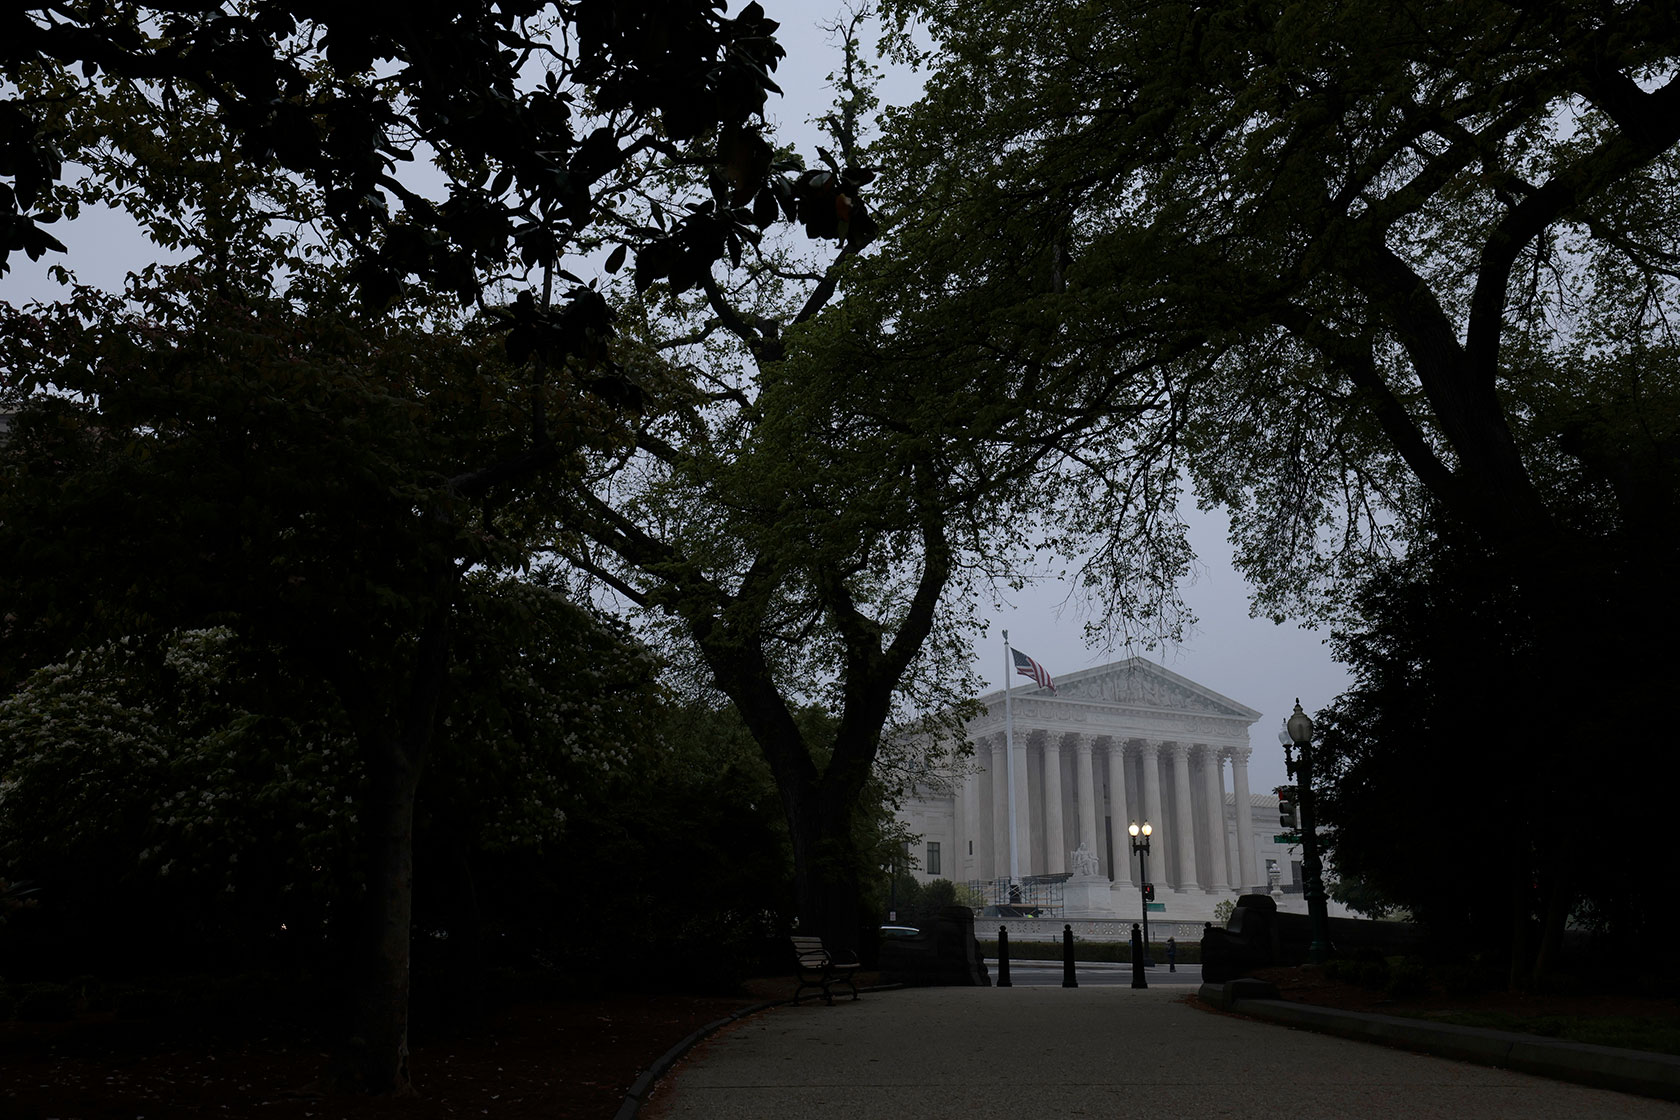 Photo shows the Supreme Court building with an American flag waving in front, through a view of silhouetted trees against a grey cloudy sky